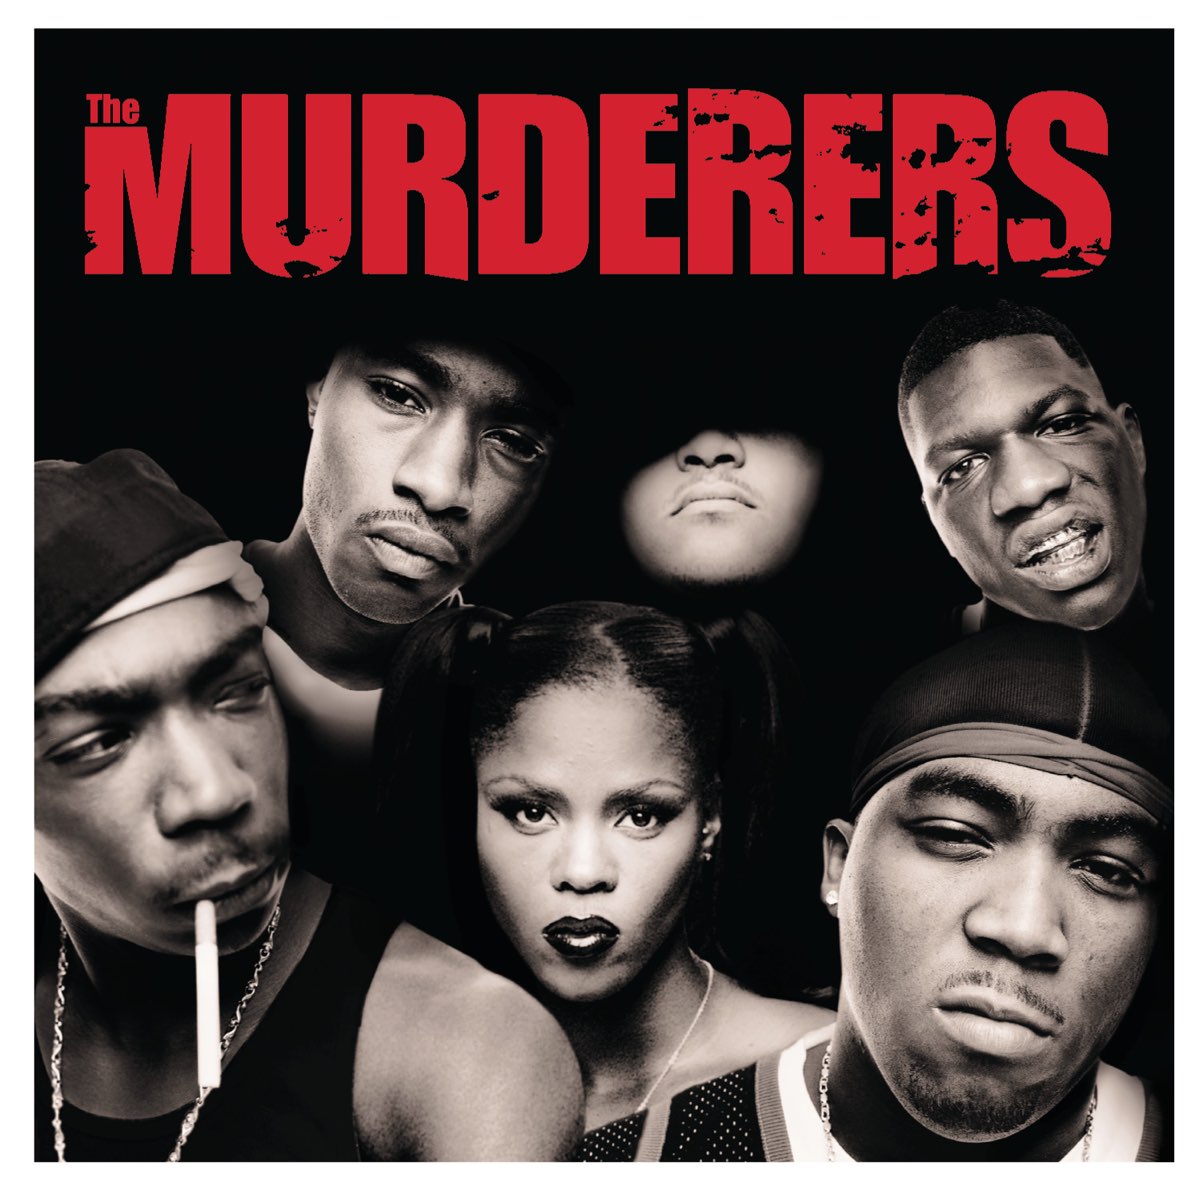 ‎Irv Gotti Presents the Murderers by Various Artists on Apple Music